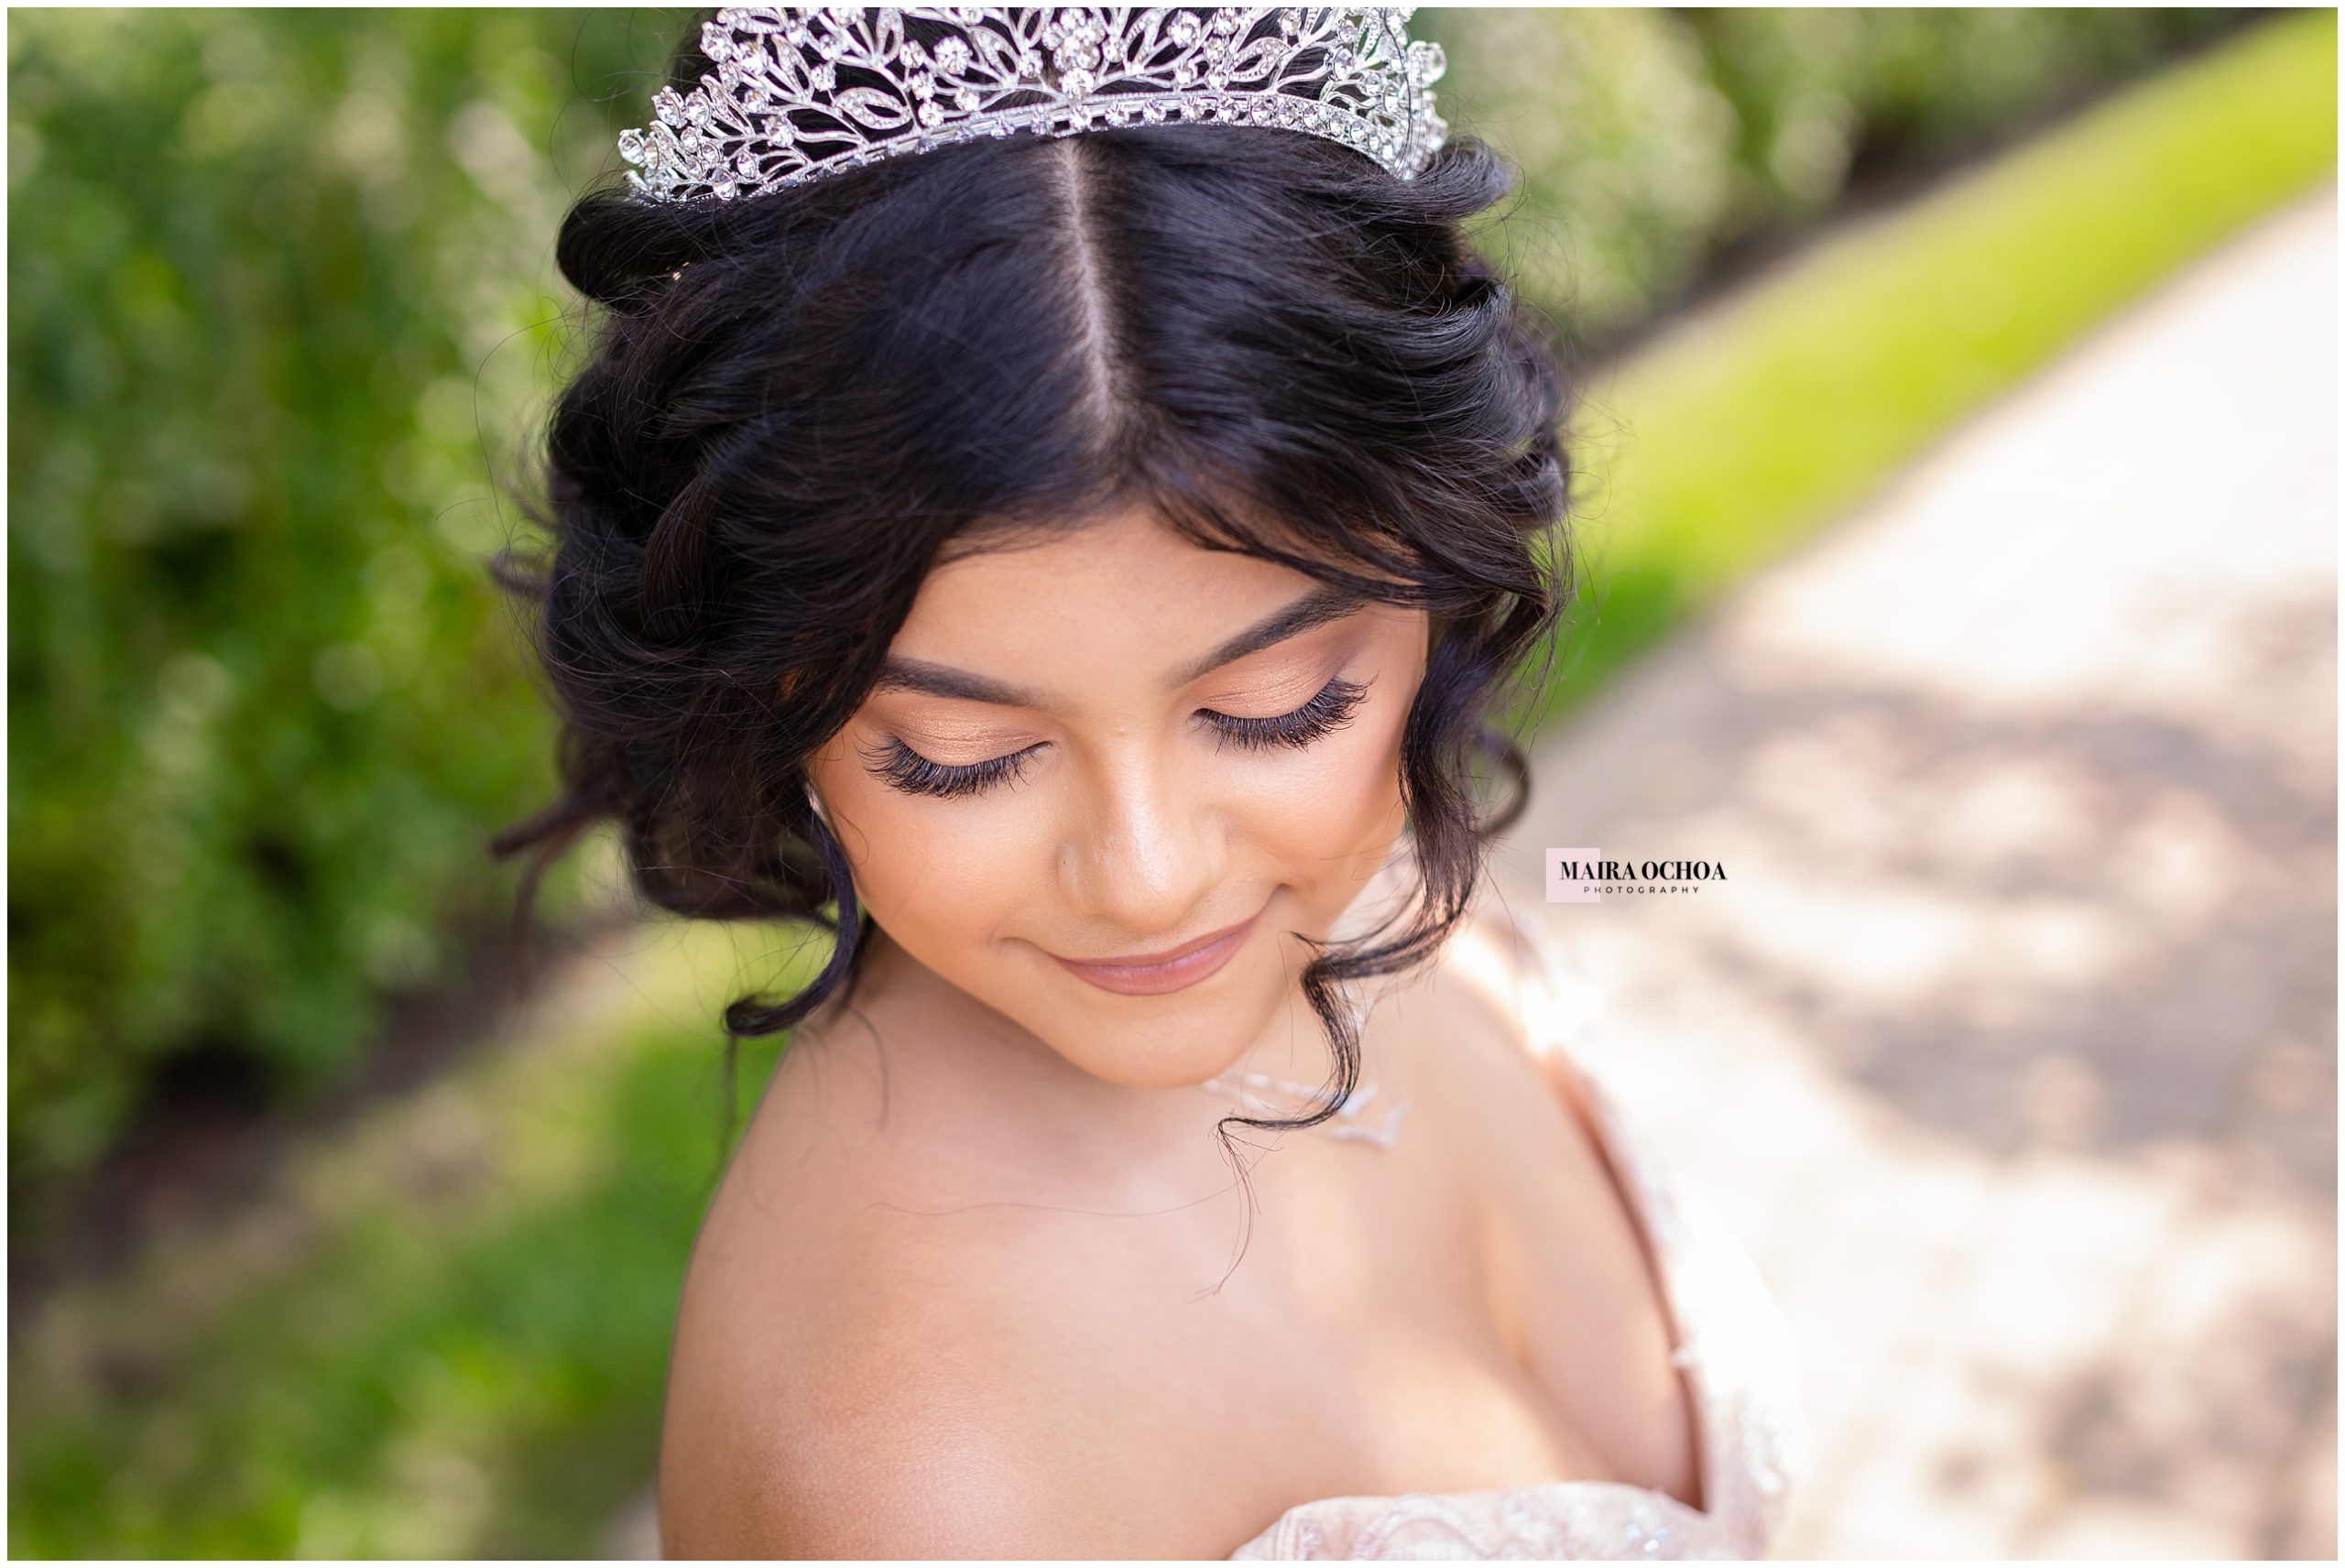 Beautiful Latina Quinceañera at the Bahá'í House of Worship Wilmette, IL